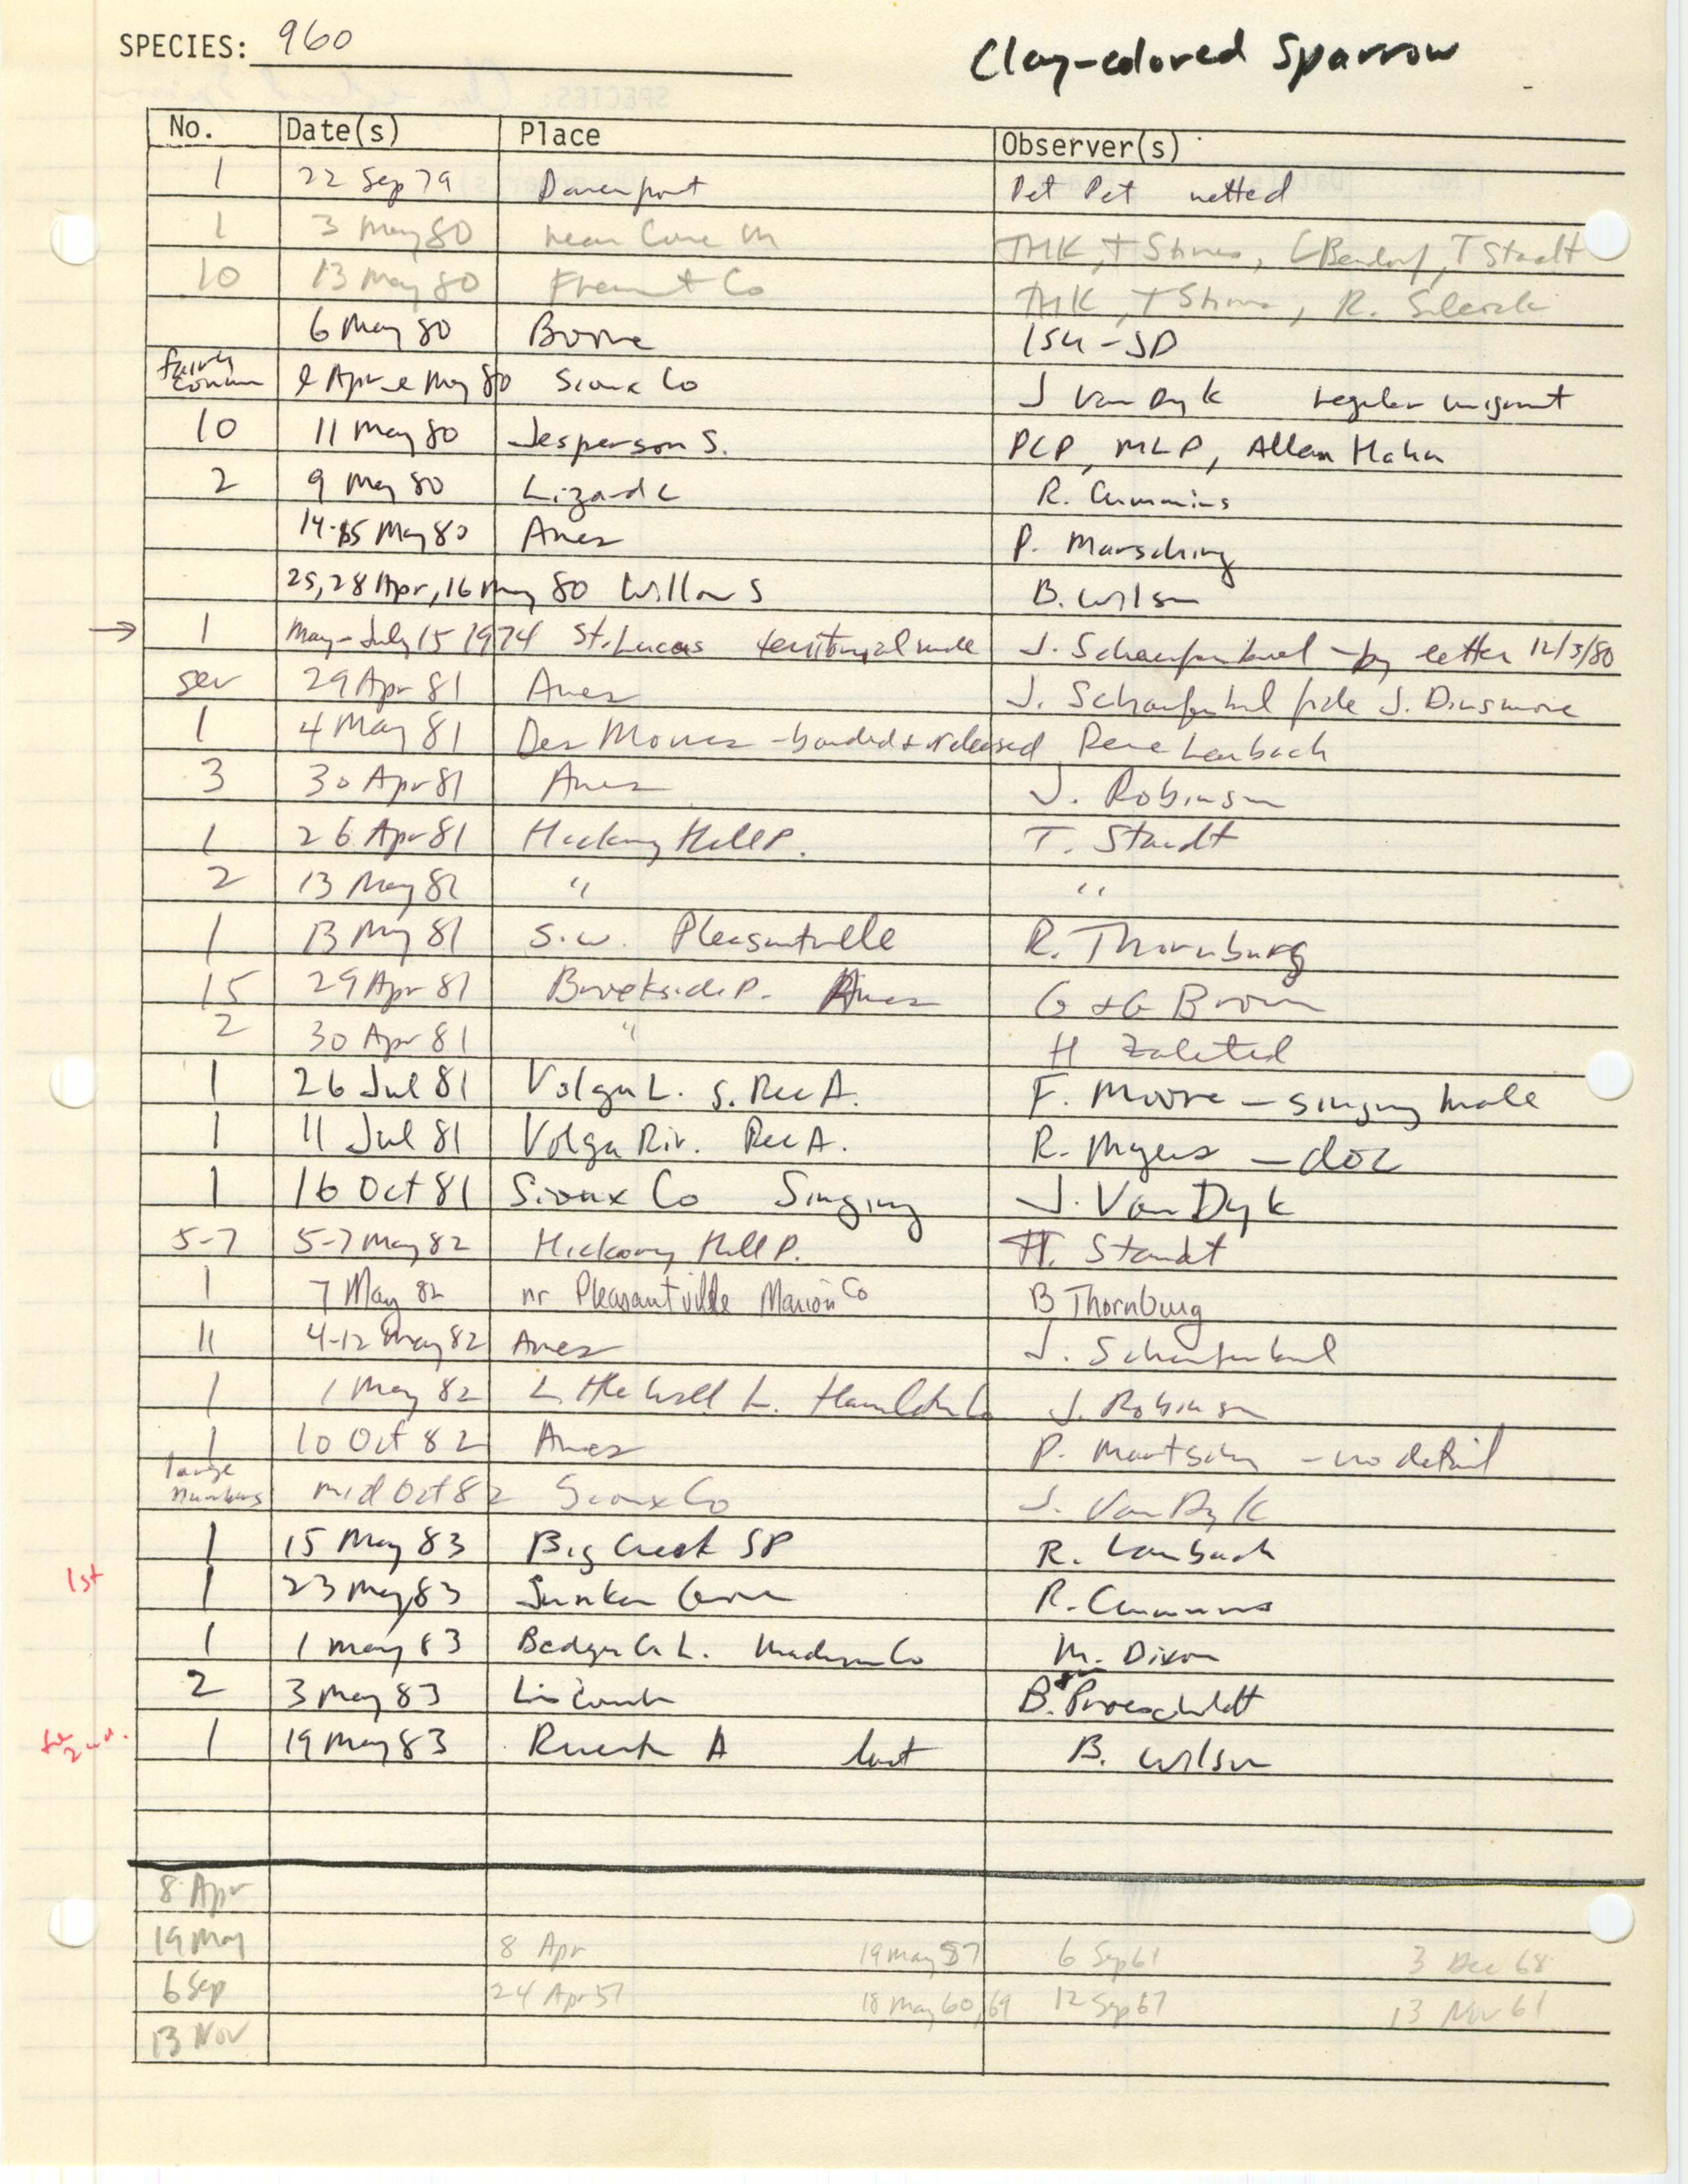 Iowa Ornithologists' Union, field report compiled data, Clay-colored Sparrow, 1974-1983